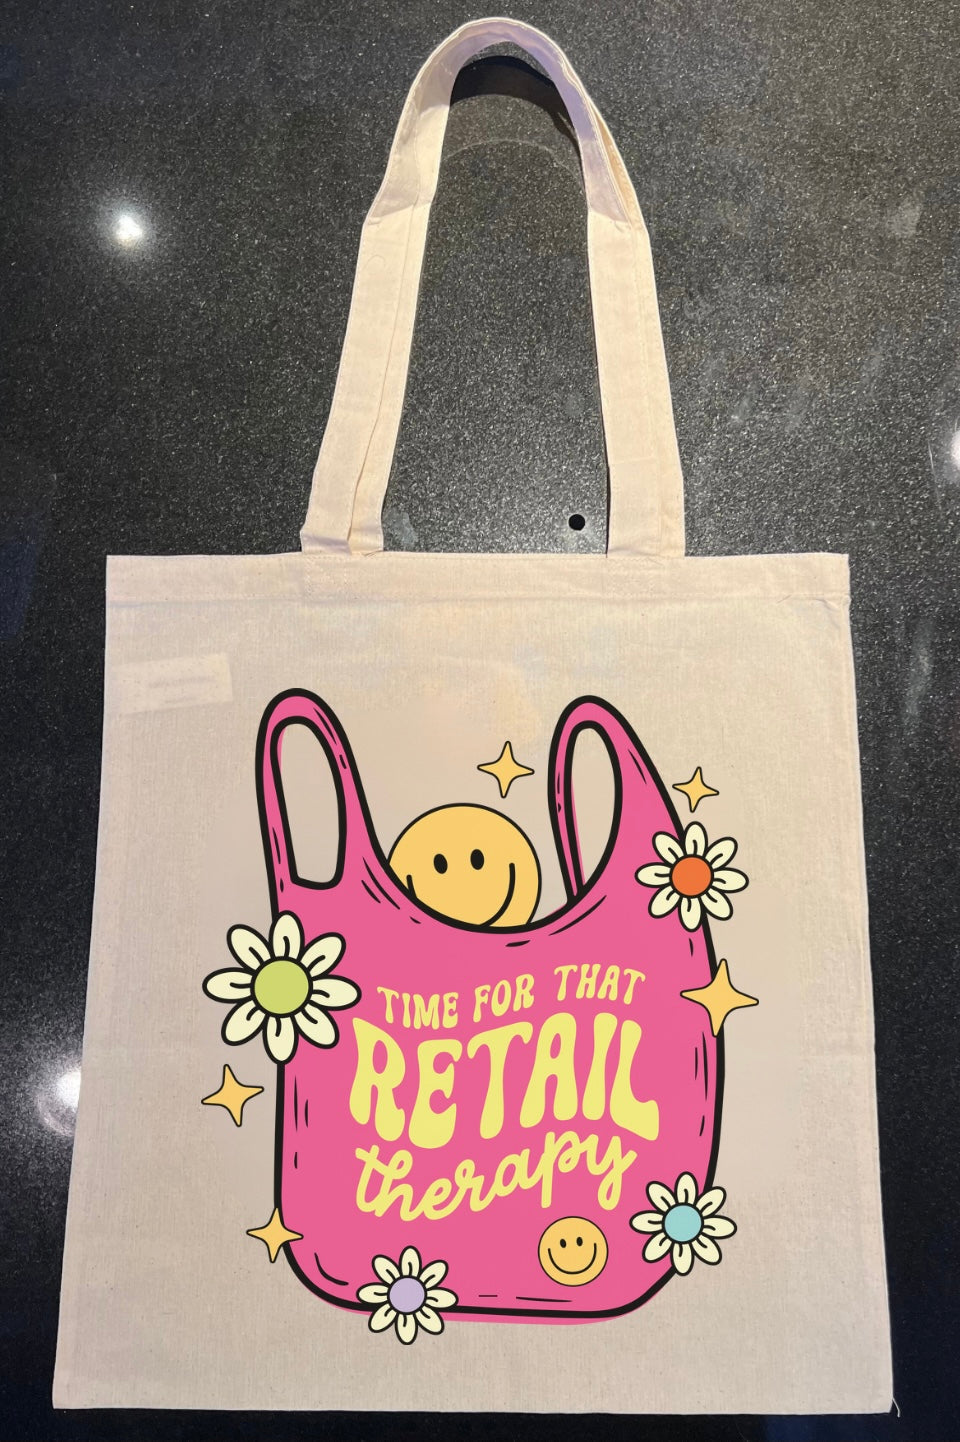 Retail Therapy Canvas Tote Bag